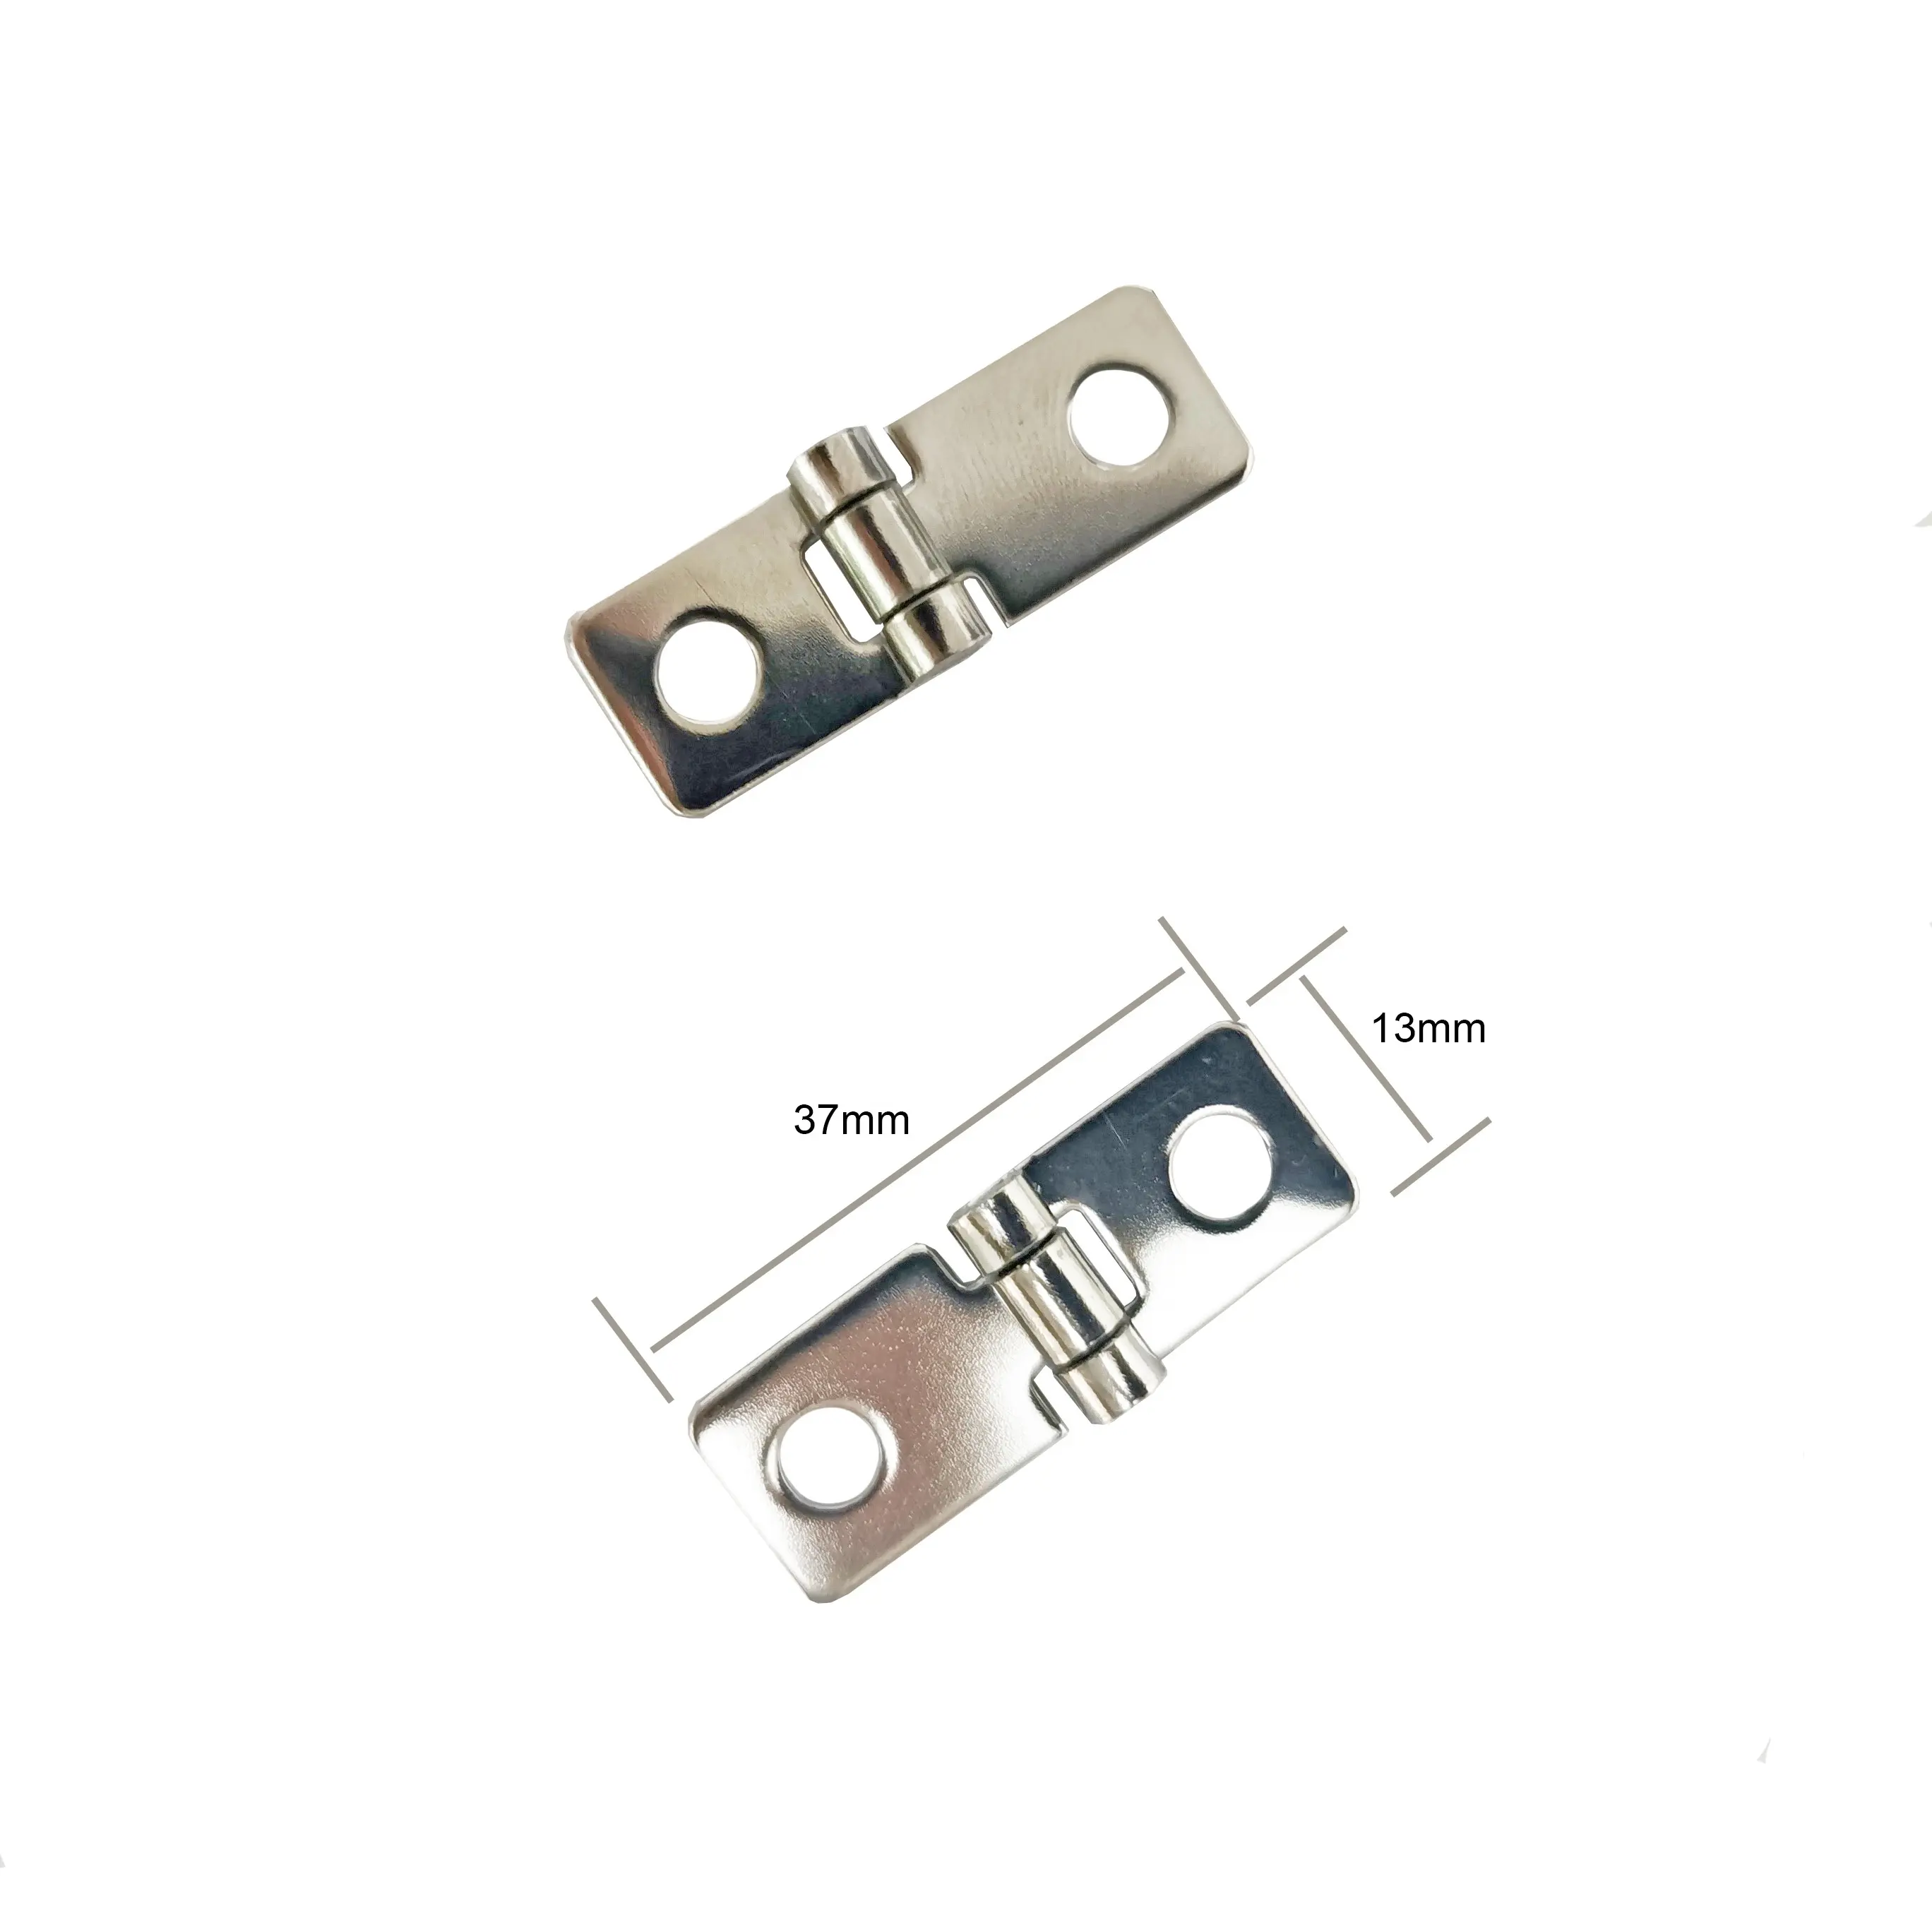 Custom Made Factory Price Stainless Steel Supper Small Hinge 37x13x1mm for DIY Mini Wooden Box Hinge